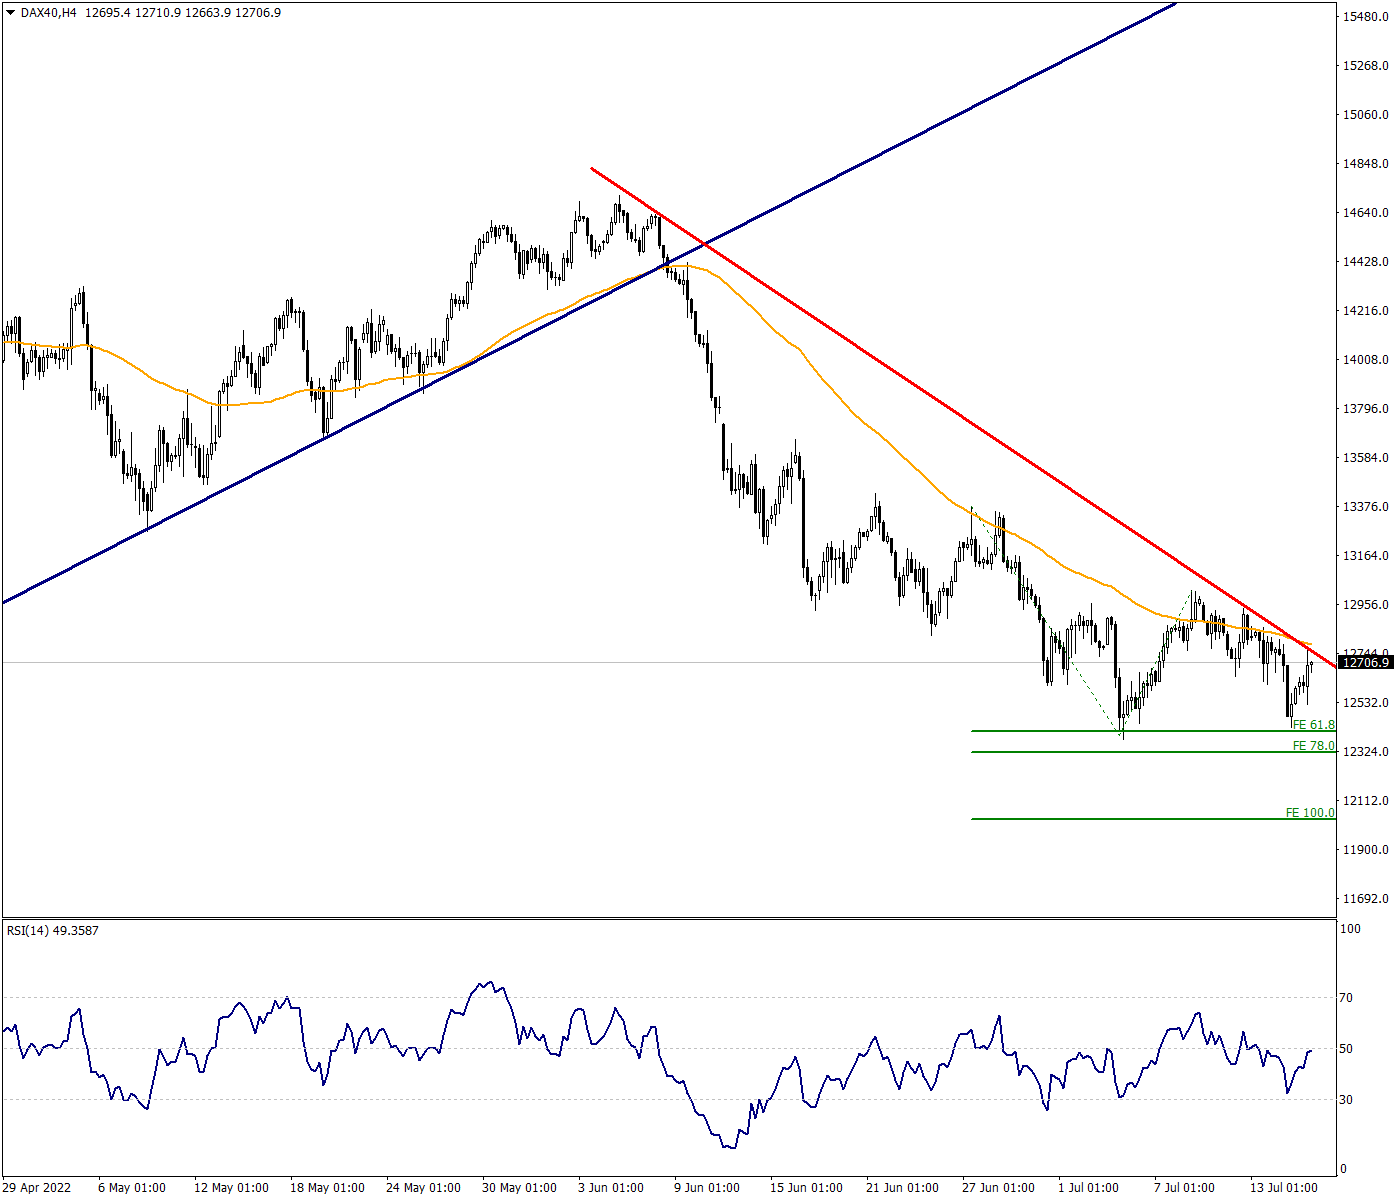 DAX40: Recovery movements will not last longer